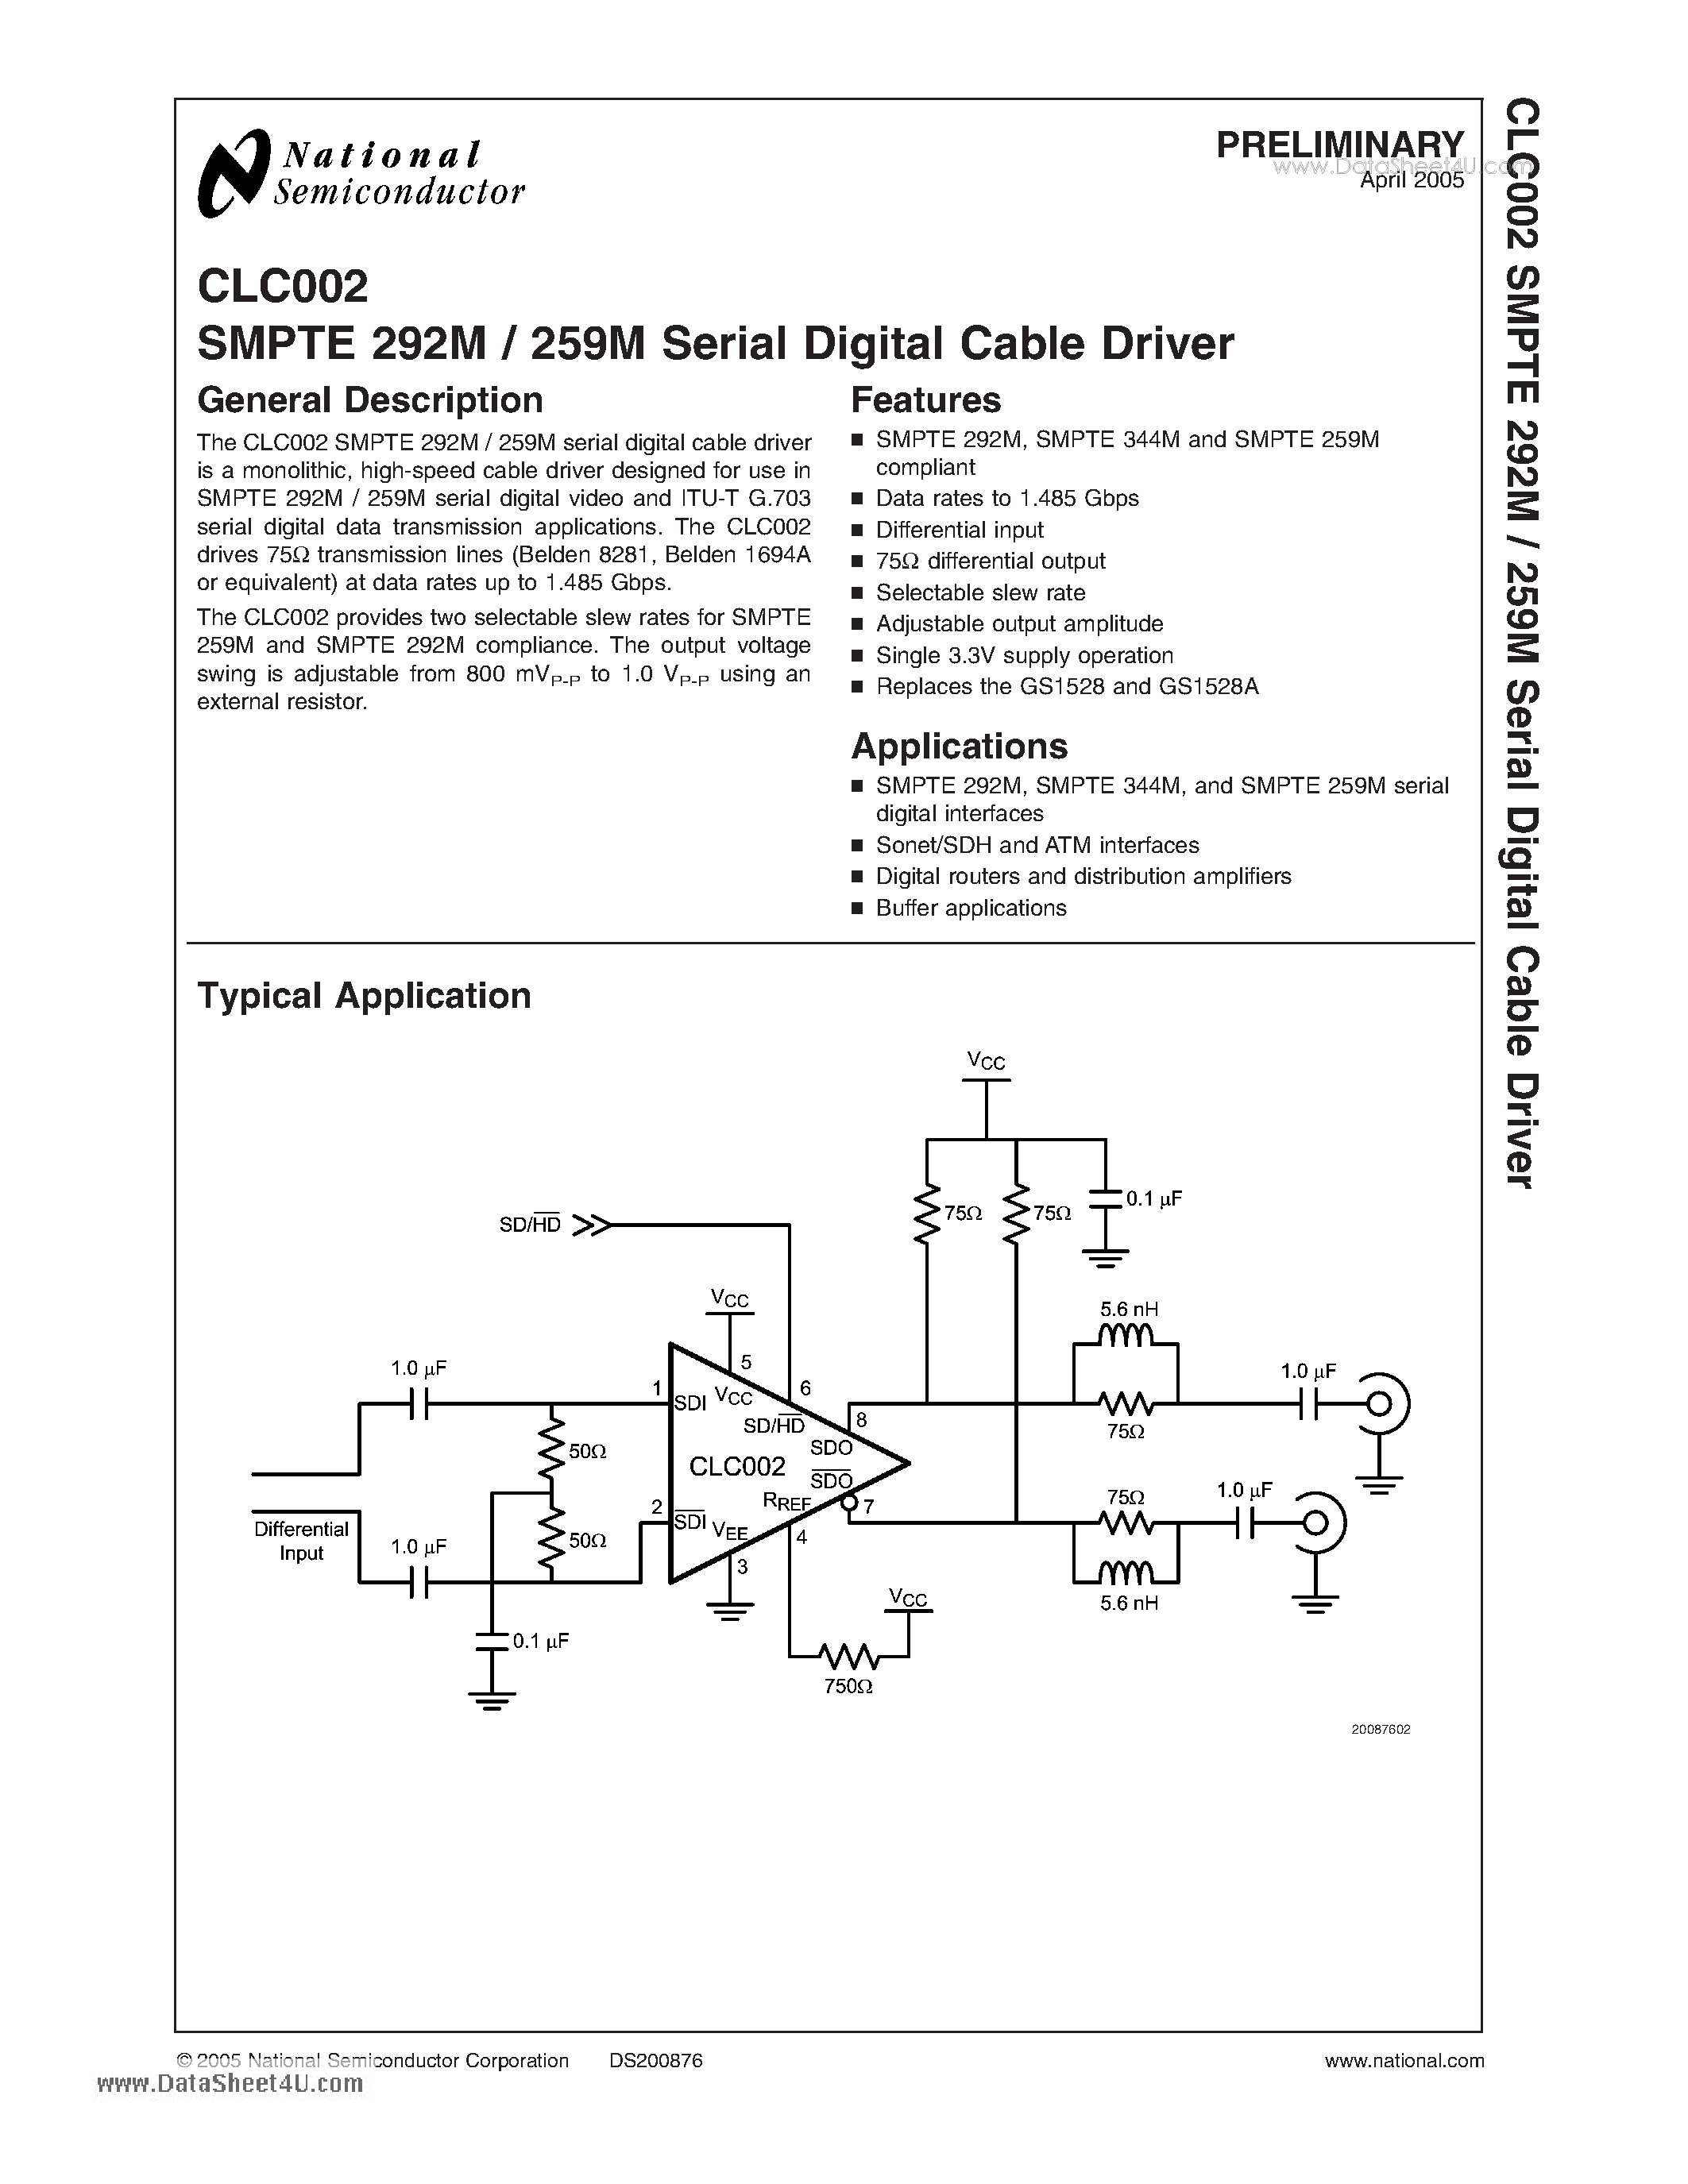 Datasheet CLC002 - SMPTE 292M / 259M Serial Digital Cable Driver page 1